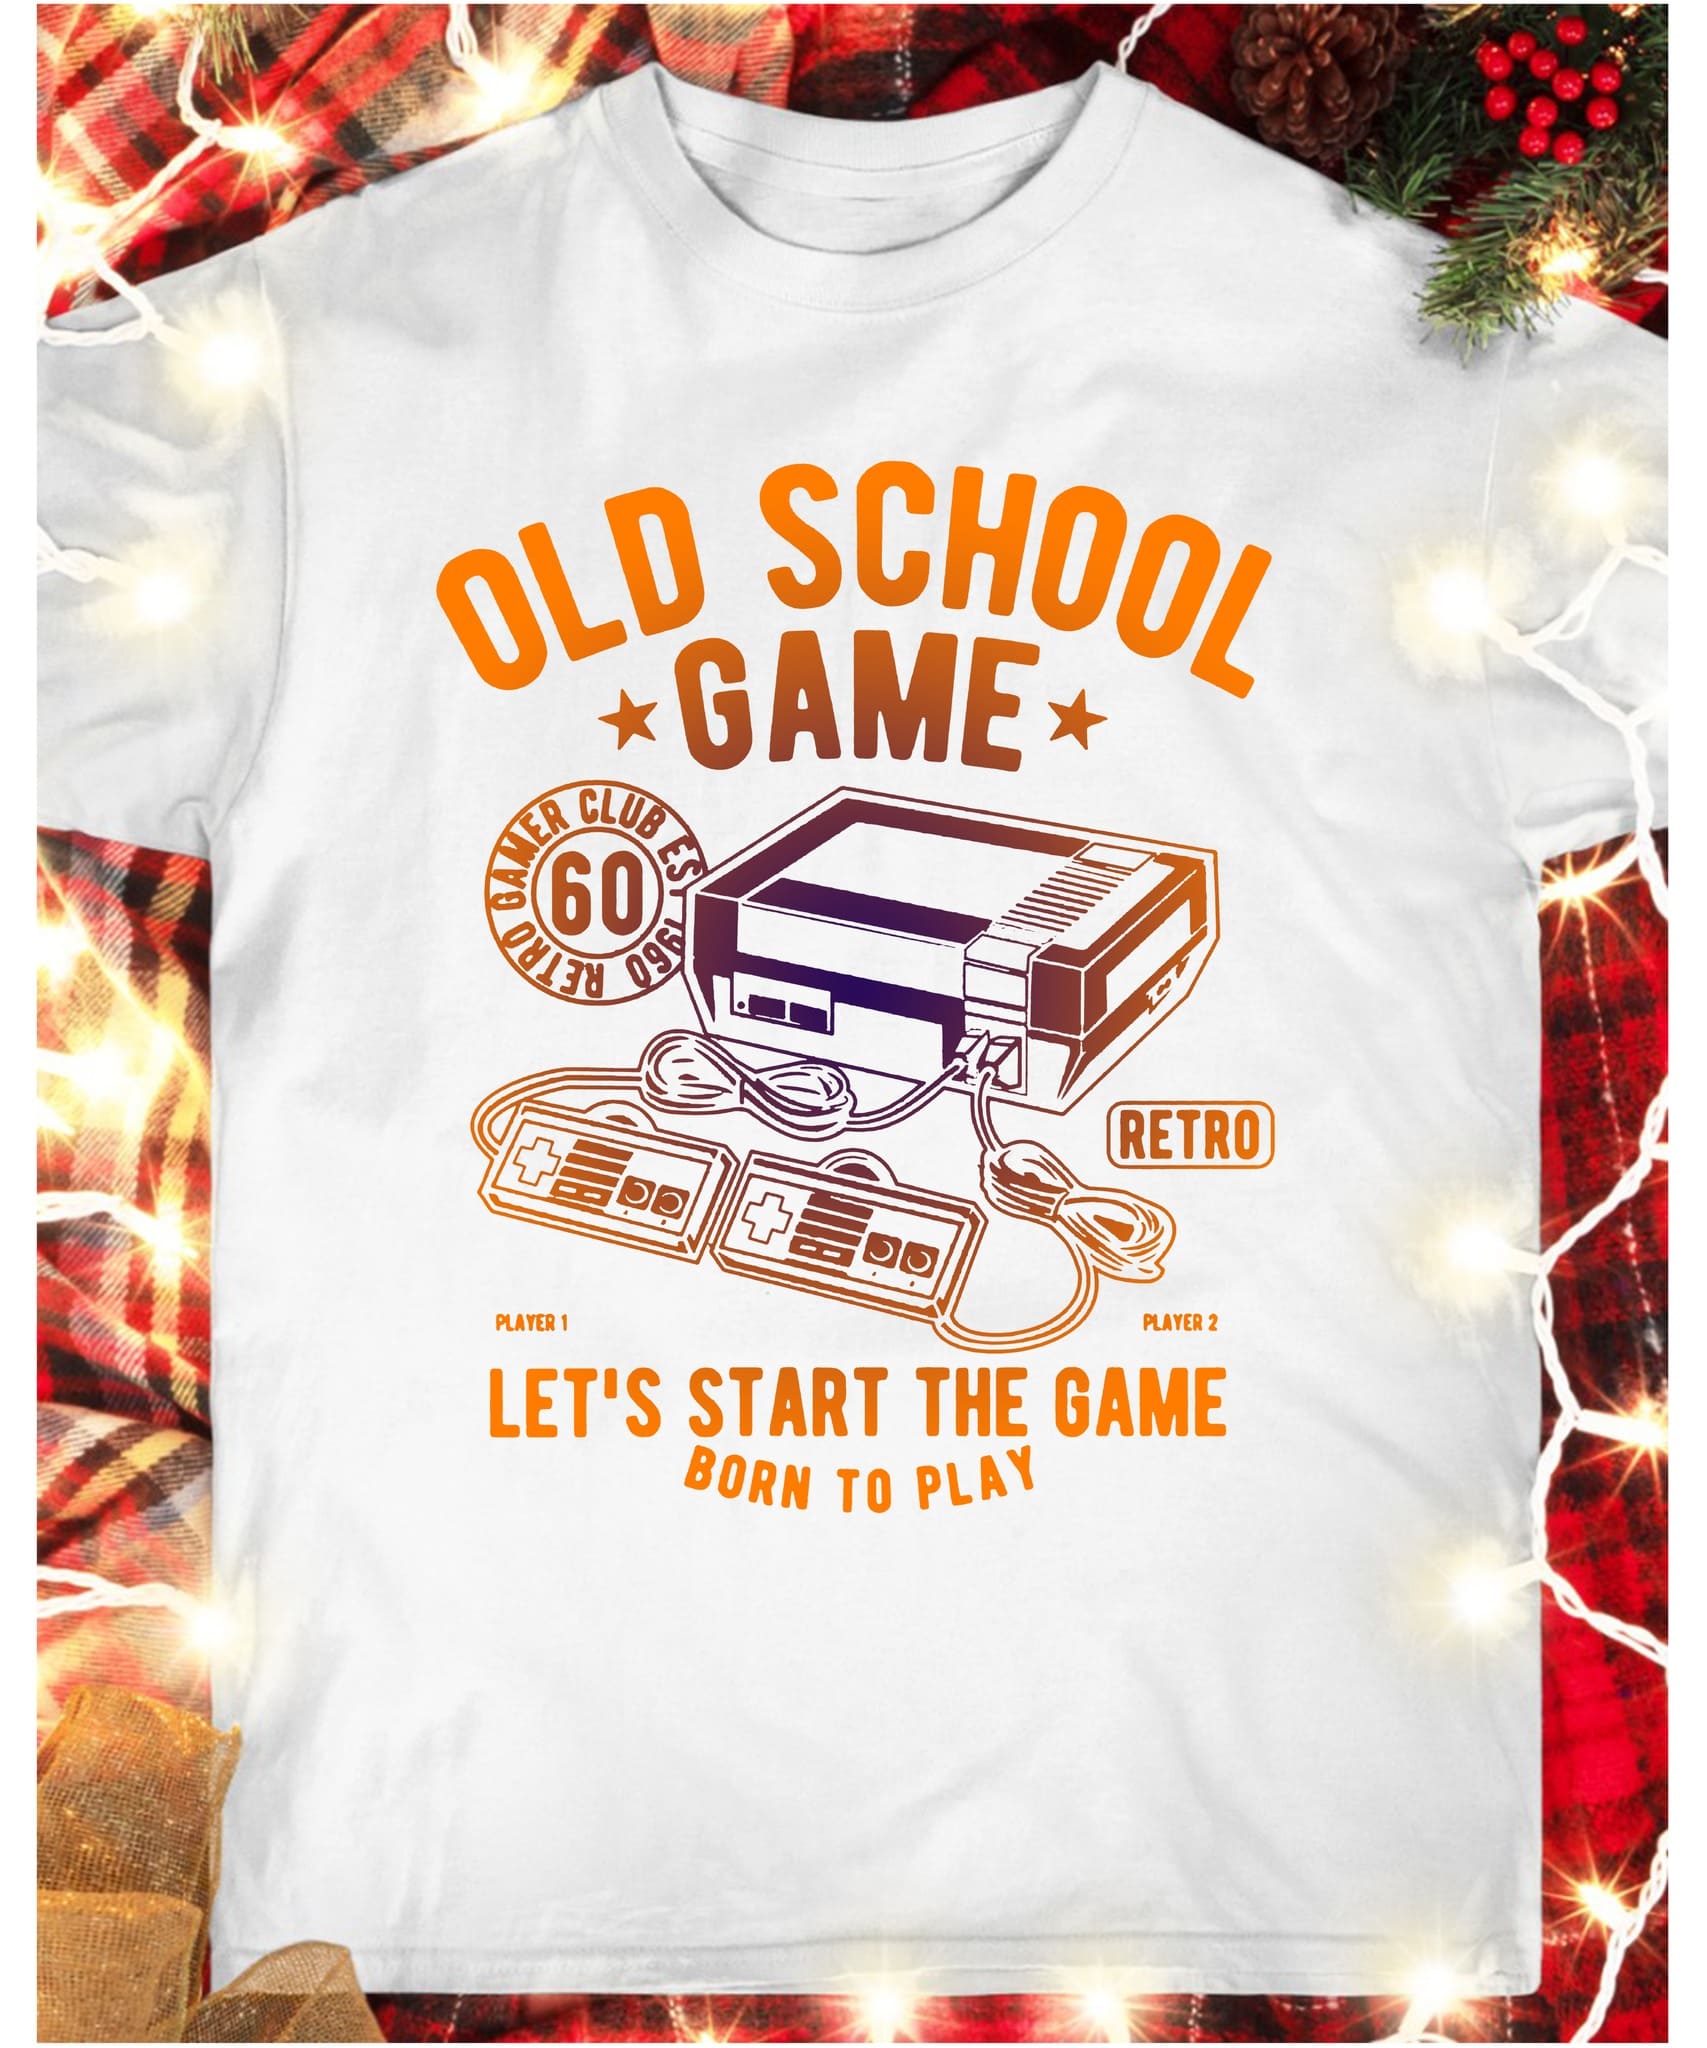 Old school game - Gamer club, let's start the game, born to play game